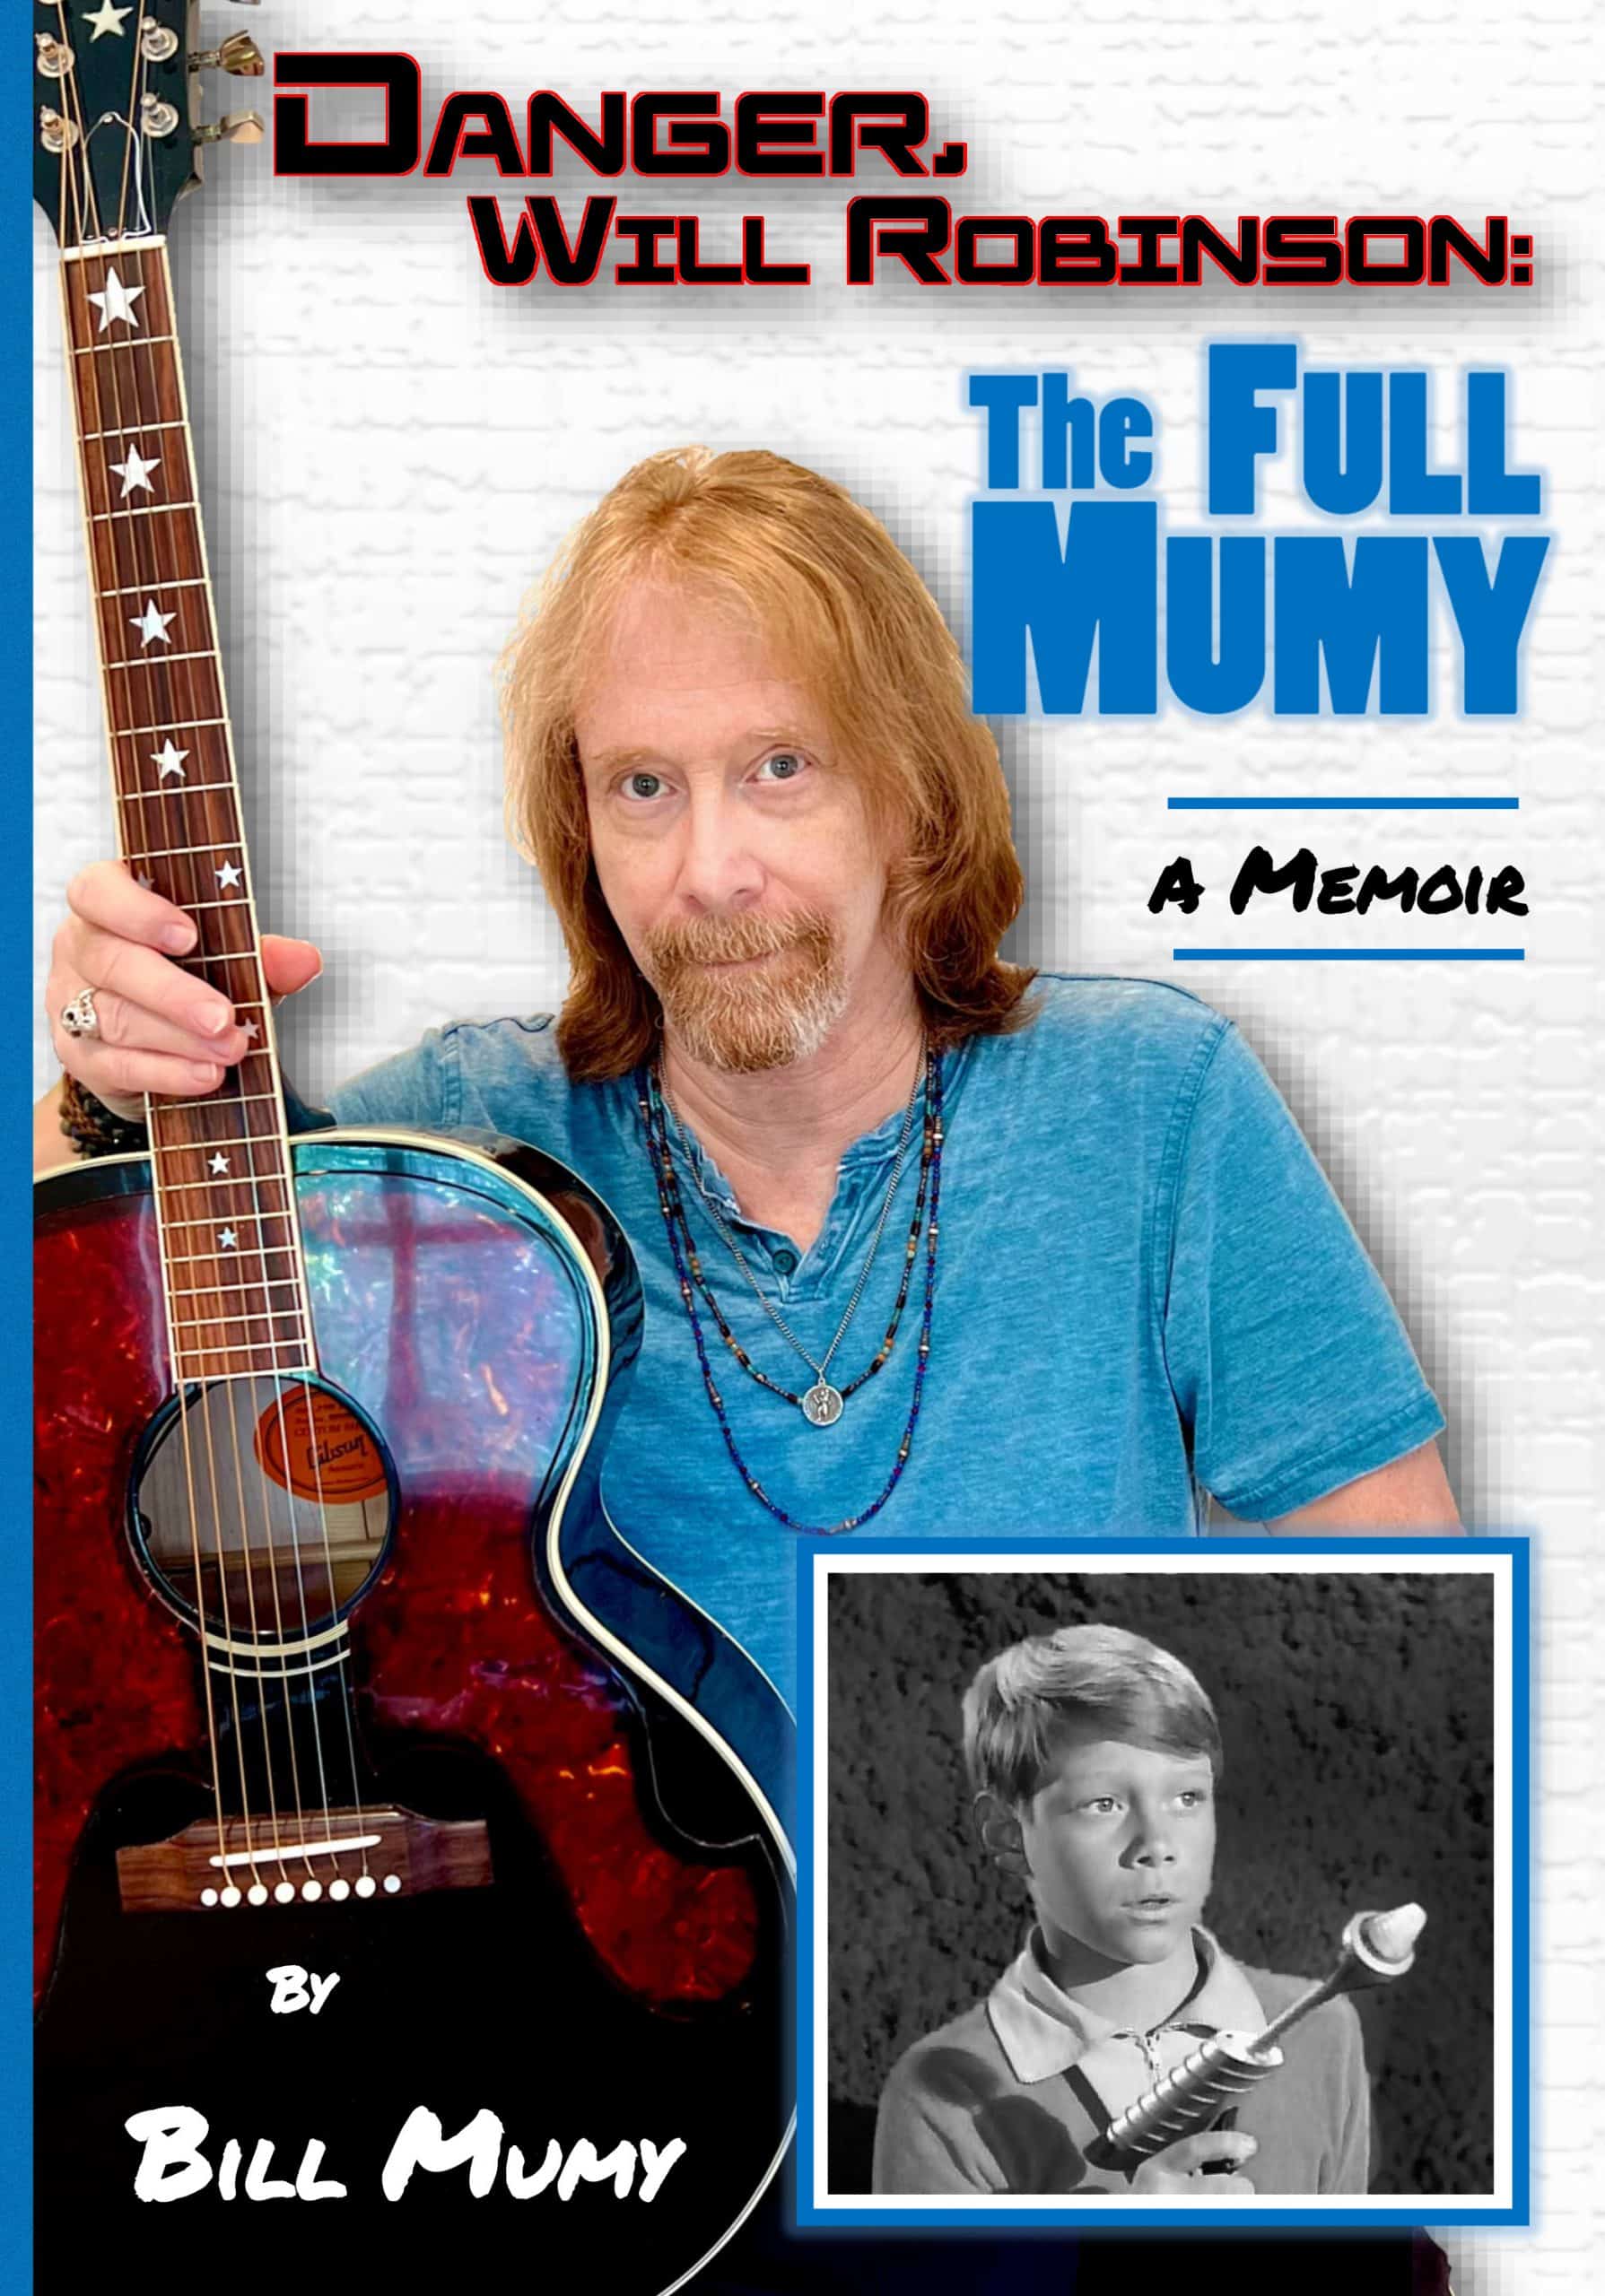 book cover of "Danger, Will Robinson: The Full Mumy," a memoir from Bill Mumy